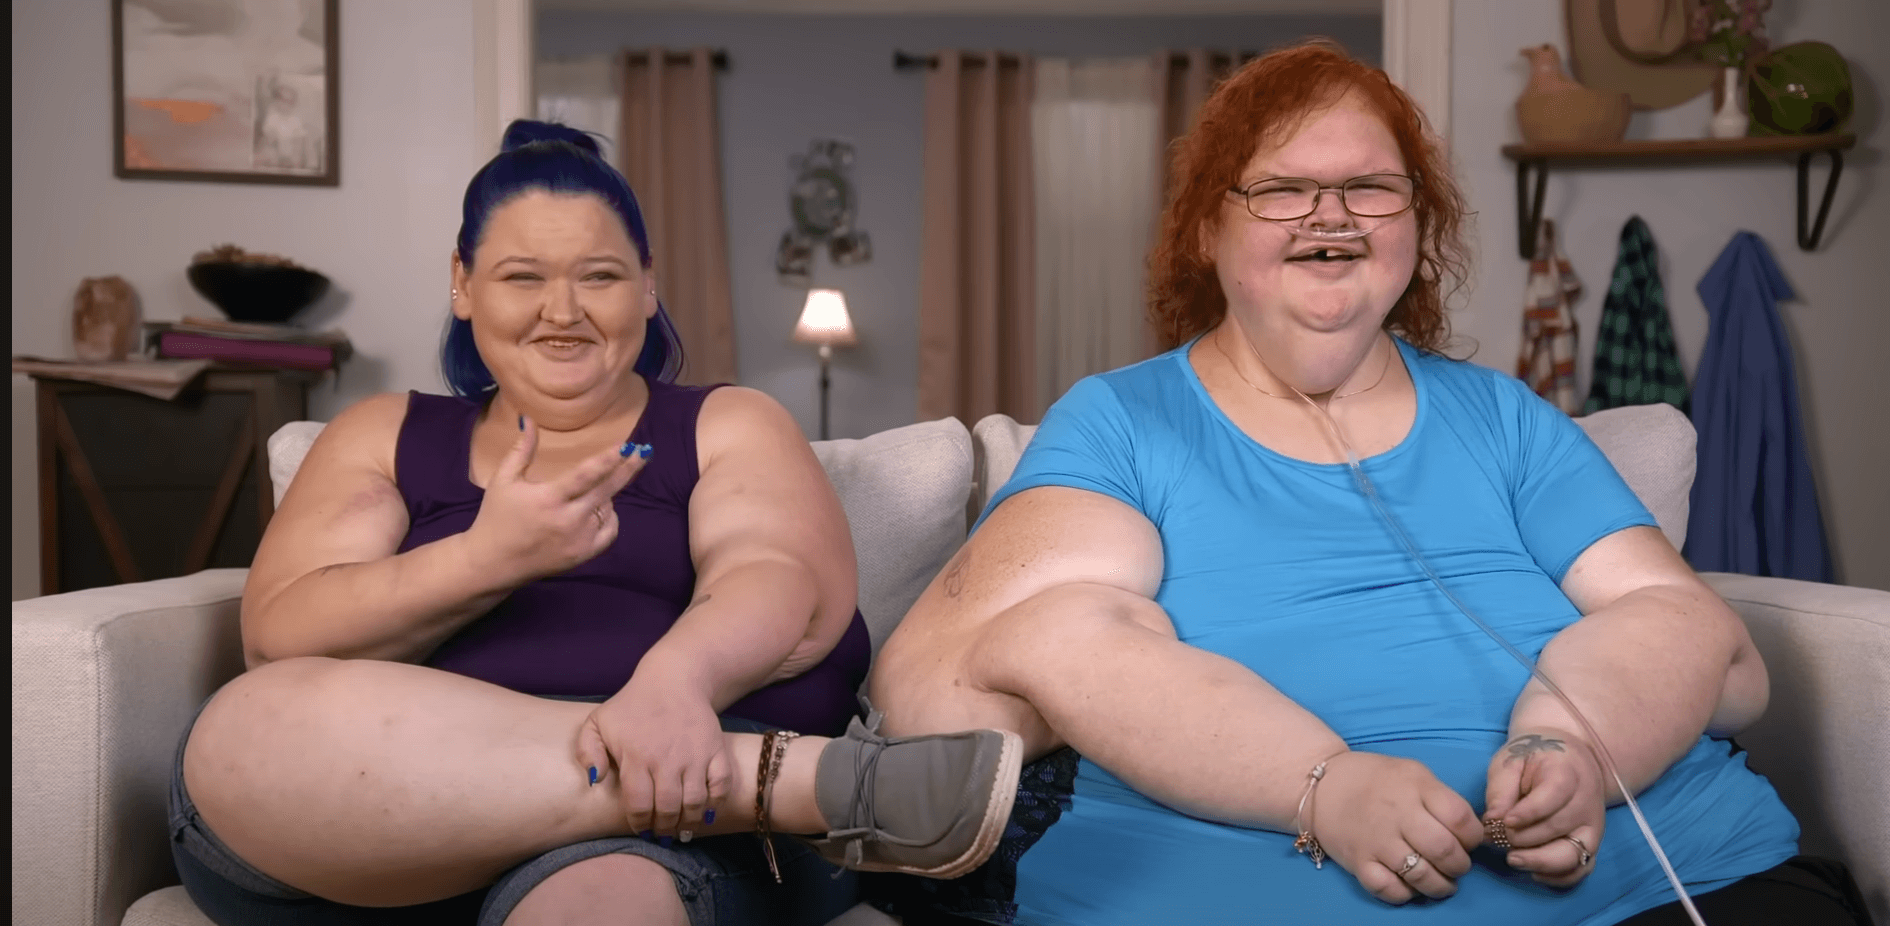 Amy and Tammy Slaton from '1000-Lb. Sisters' Season 5 sitting next to each other on a couch